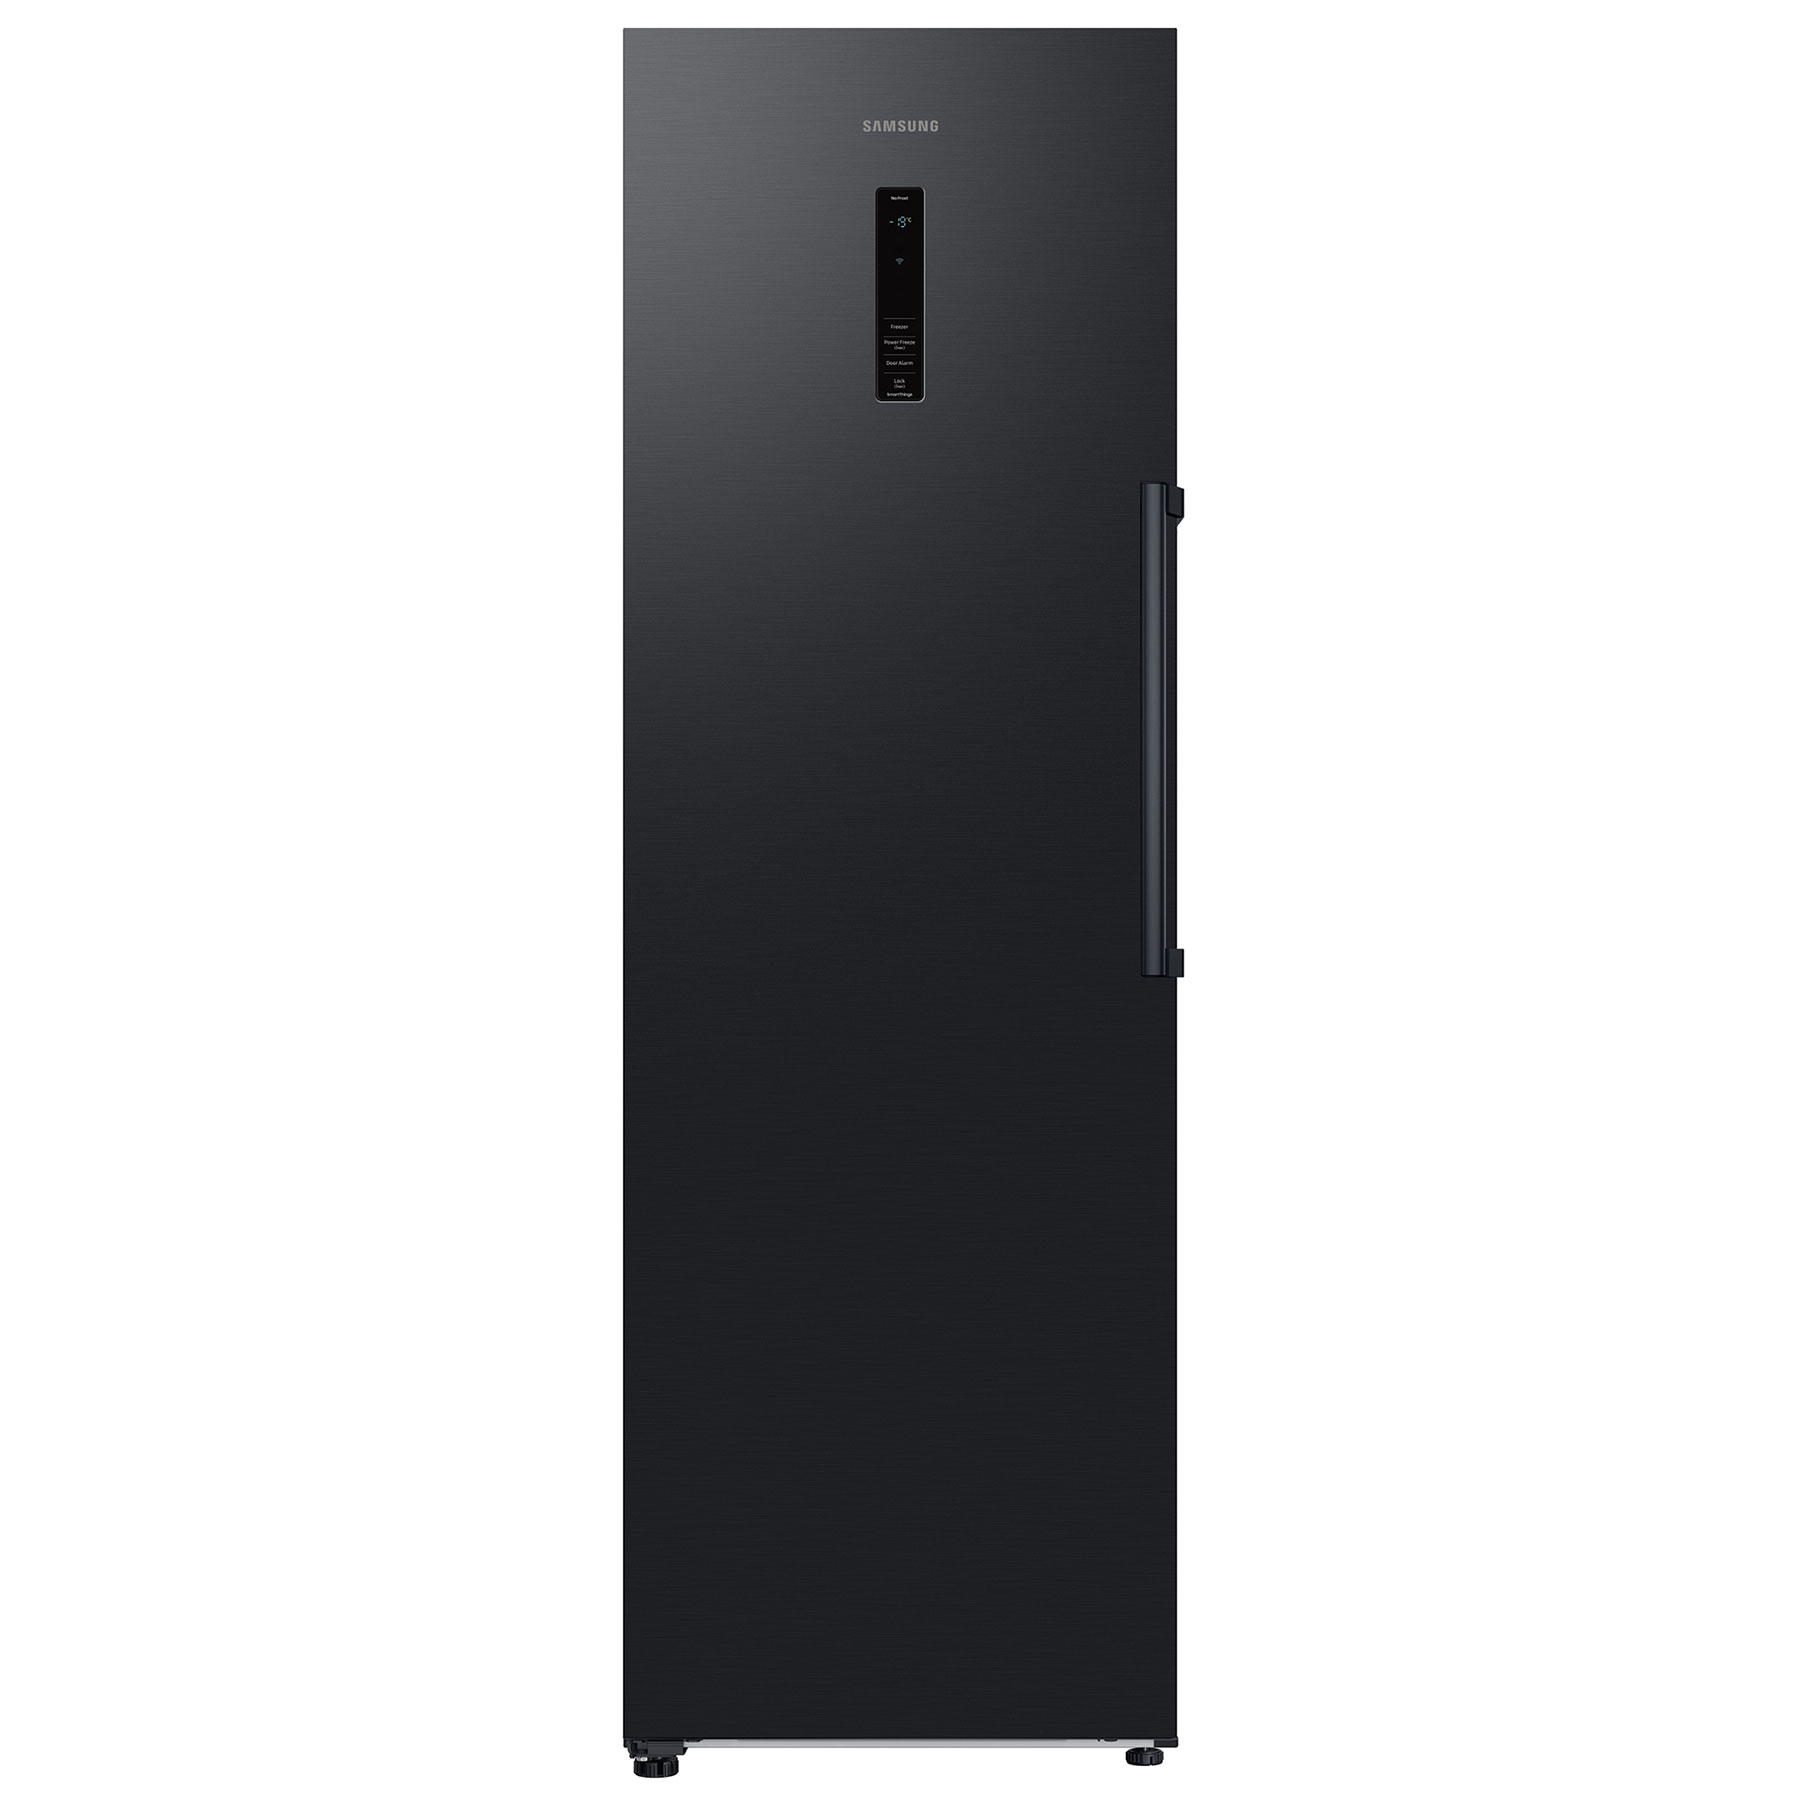 Image of Samsung RZ32C7BDEBN 60cm Tall Frost Free Freezer Black 1 86m E Rated 3